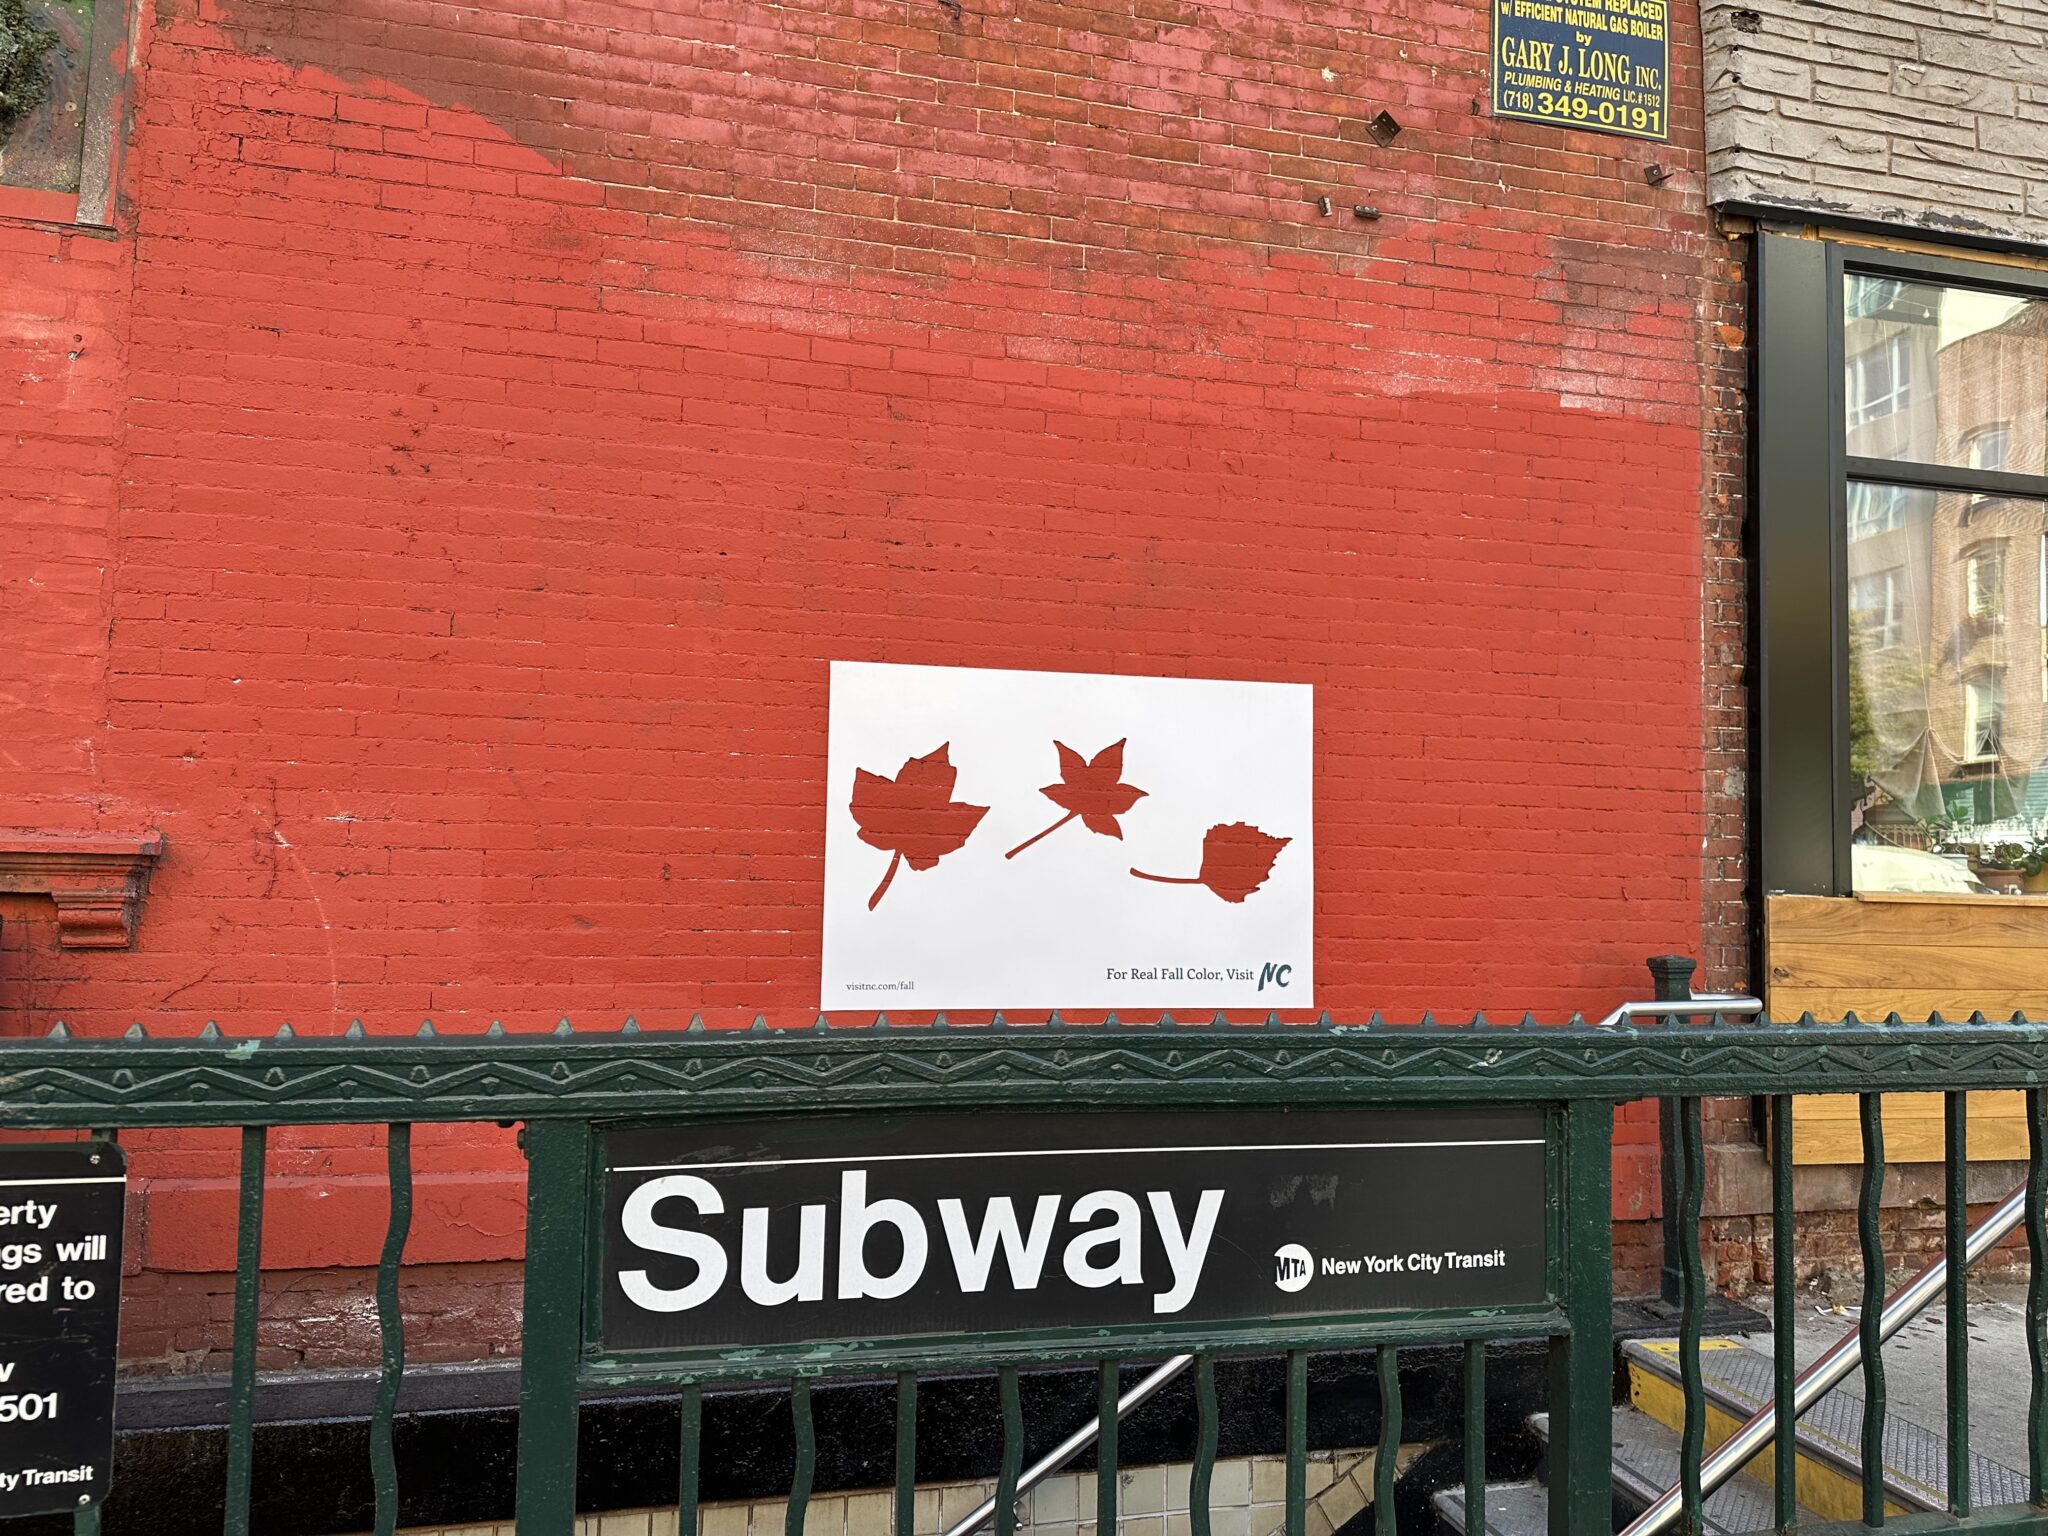 A sticker with leaf shaped cut outs has been placed over a red brick wall to demonstrate Visit North Carolina's Real Fall Campaign.